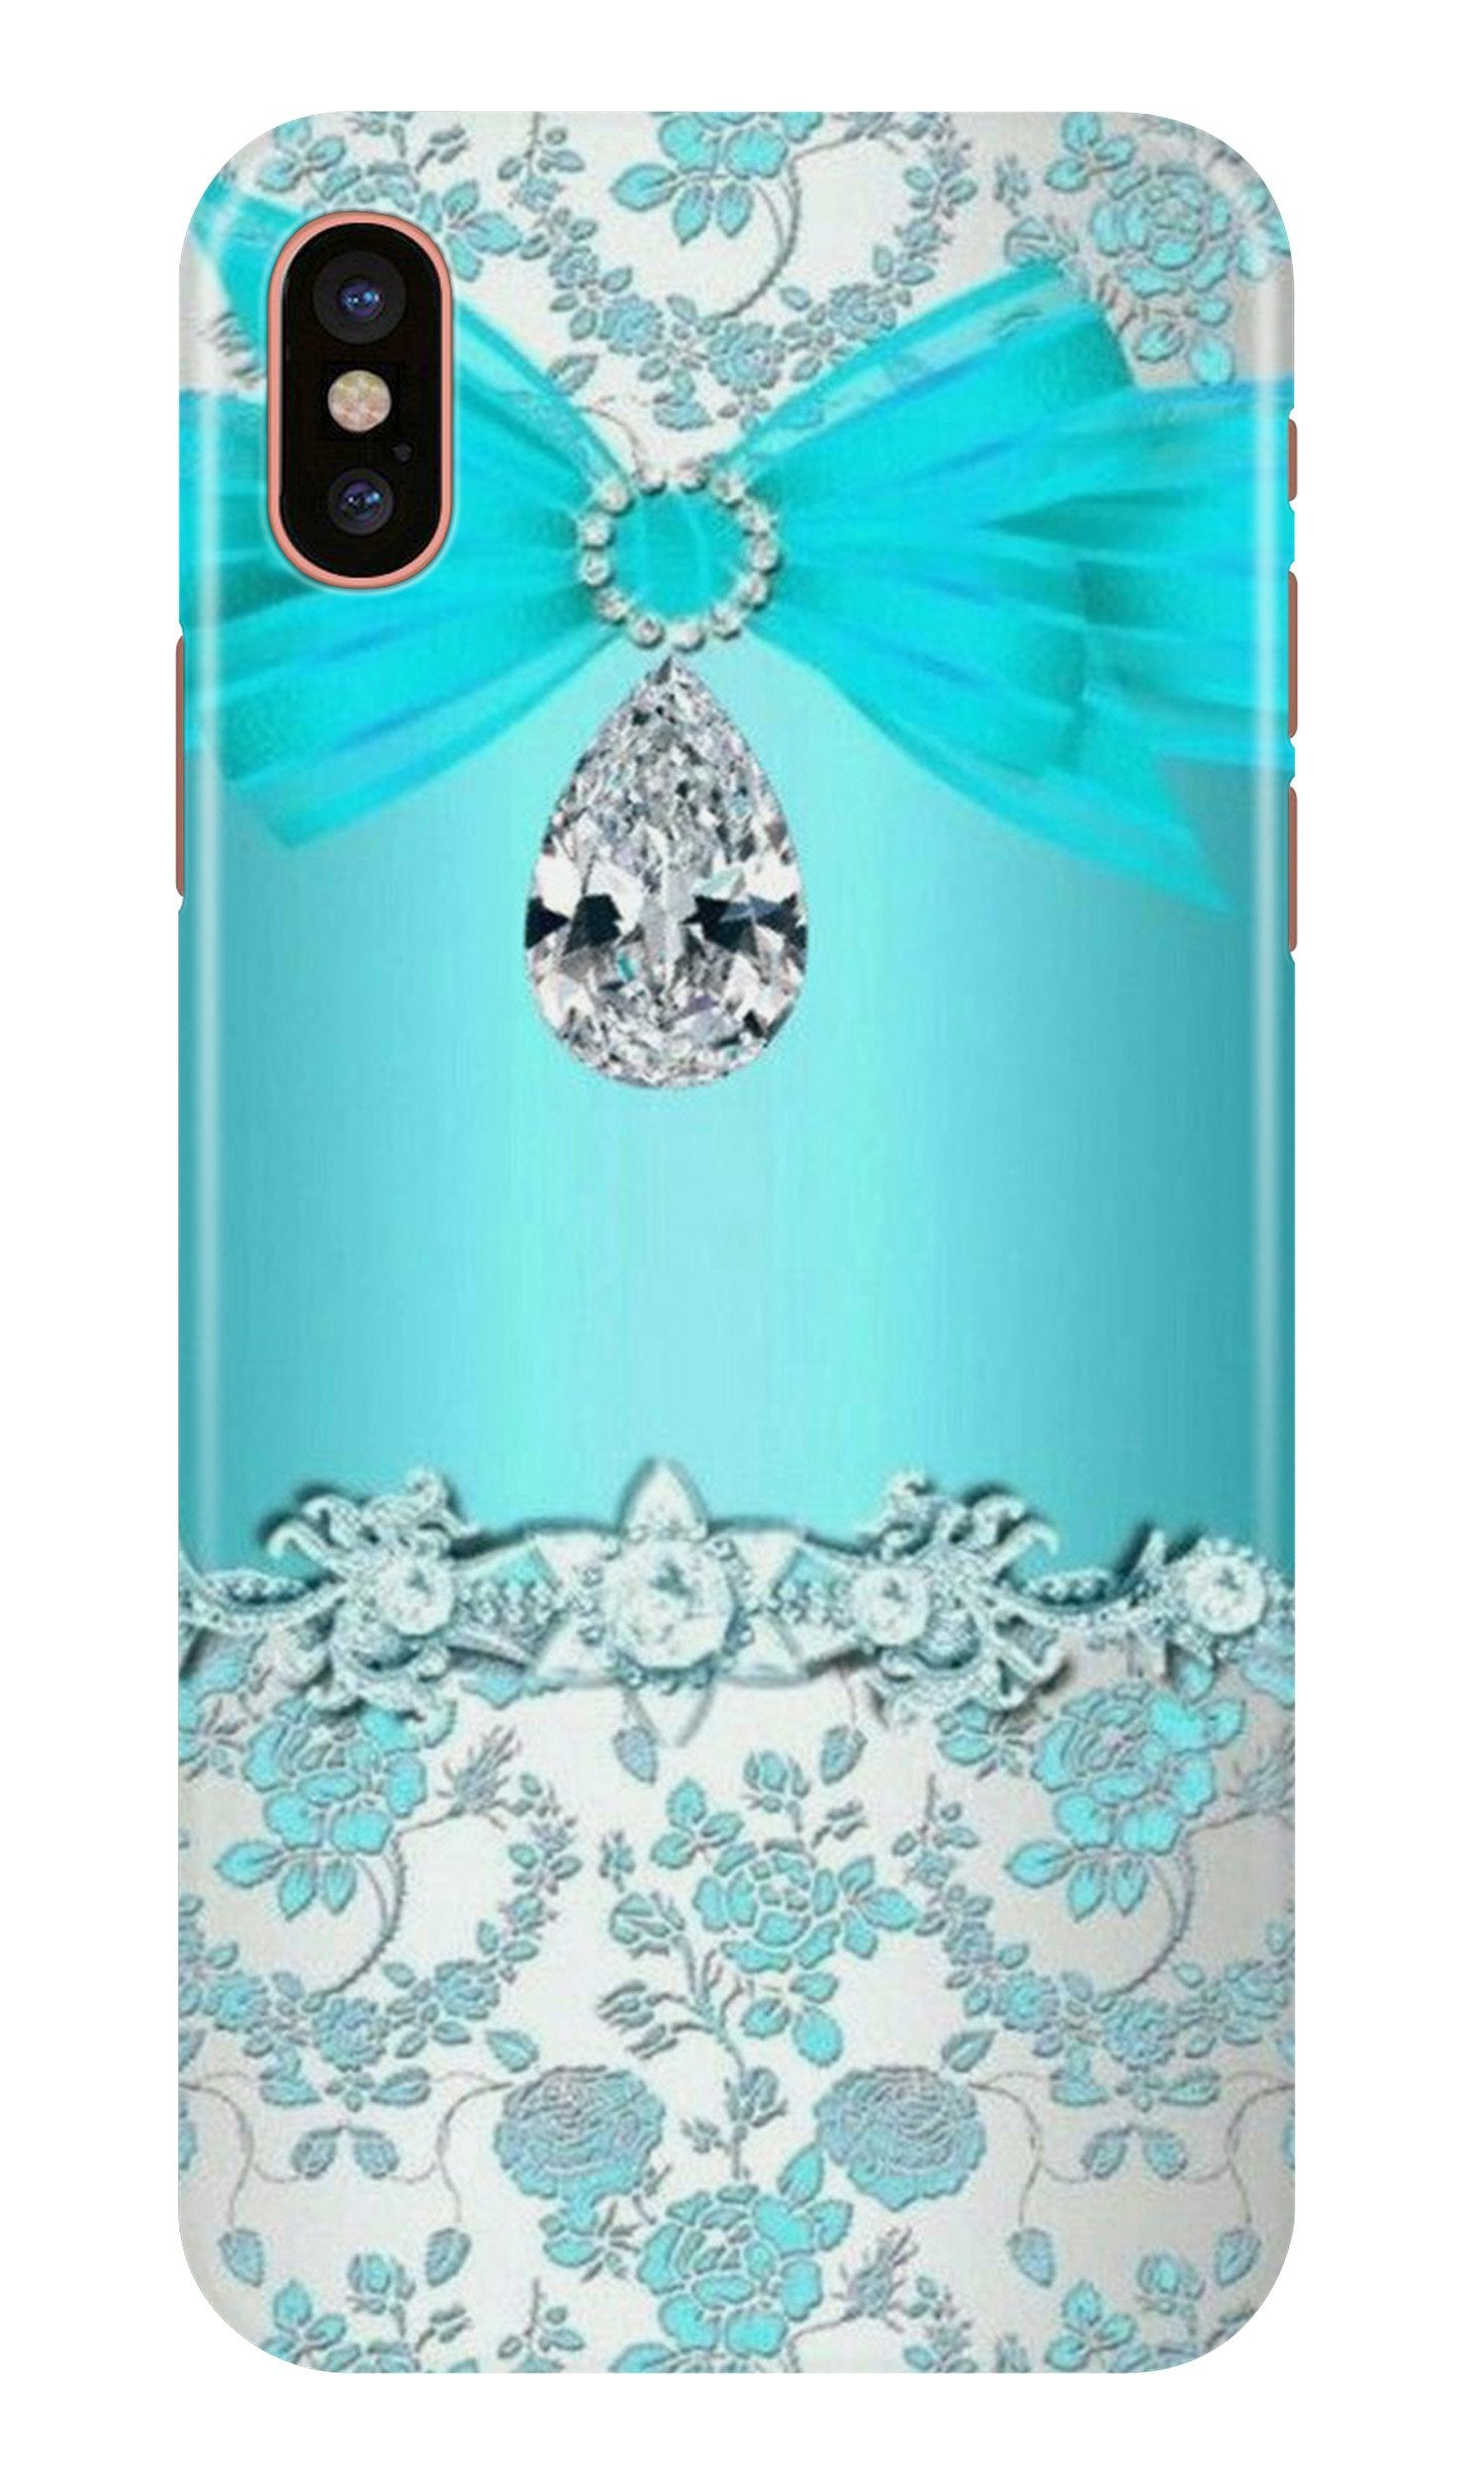 Shinny Blue Background Case for iPhone X